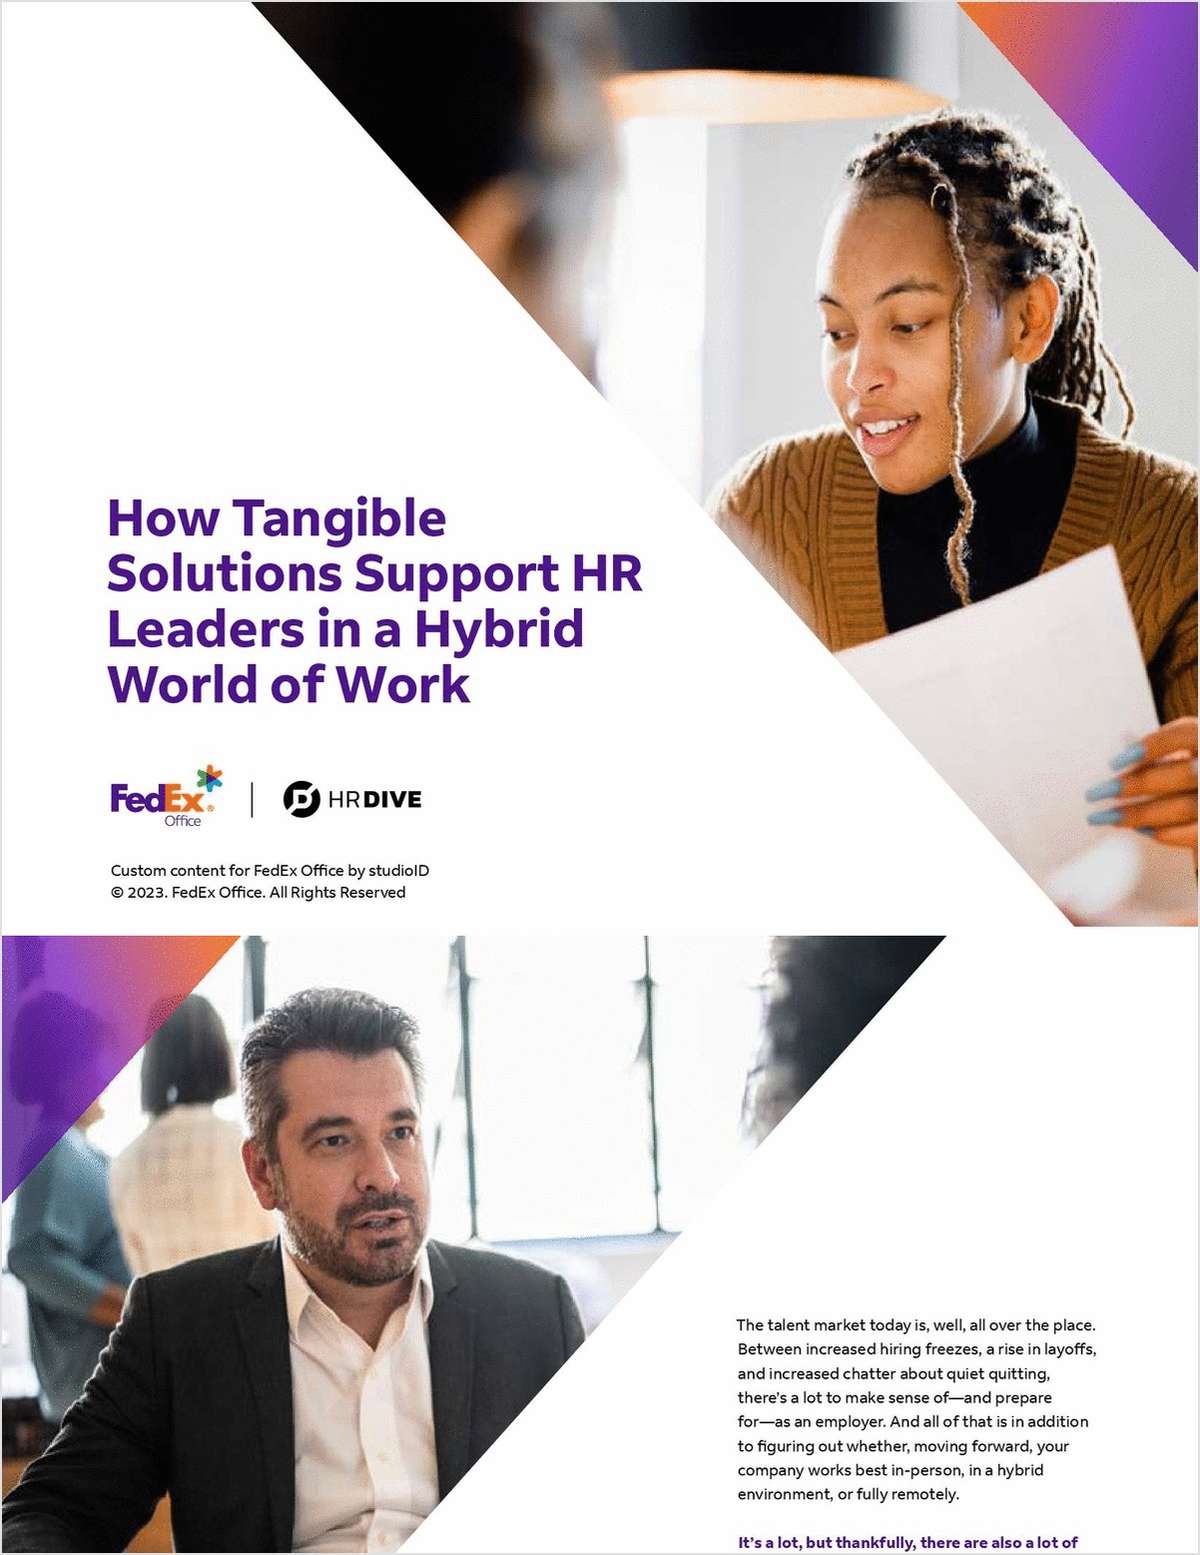 Why HR Needs Tangible Solutions in the Hybrid Workplace